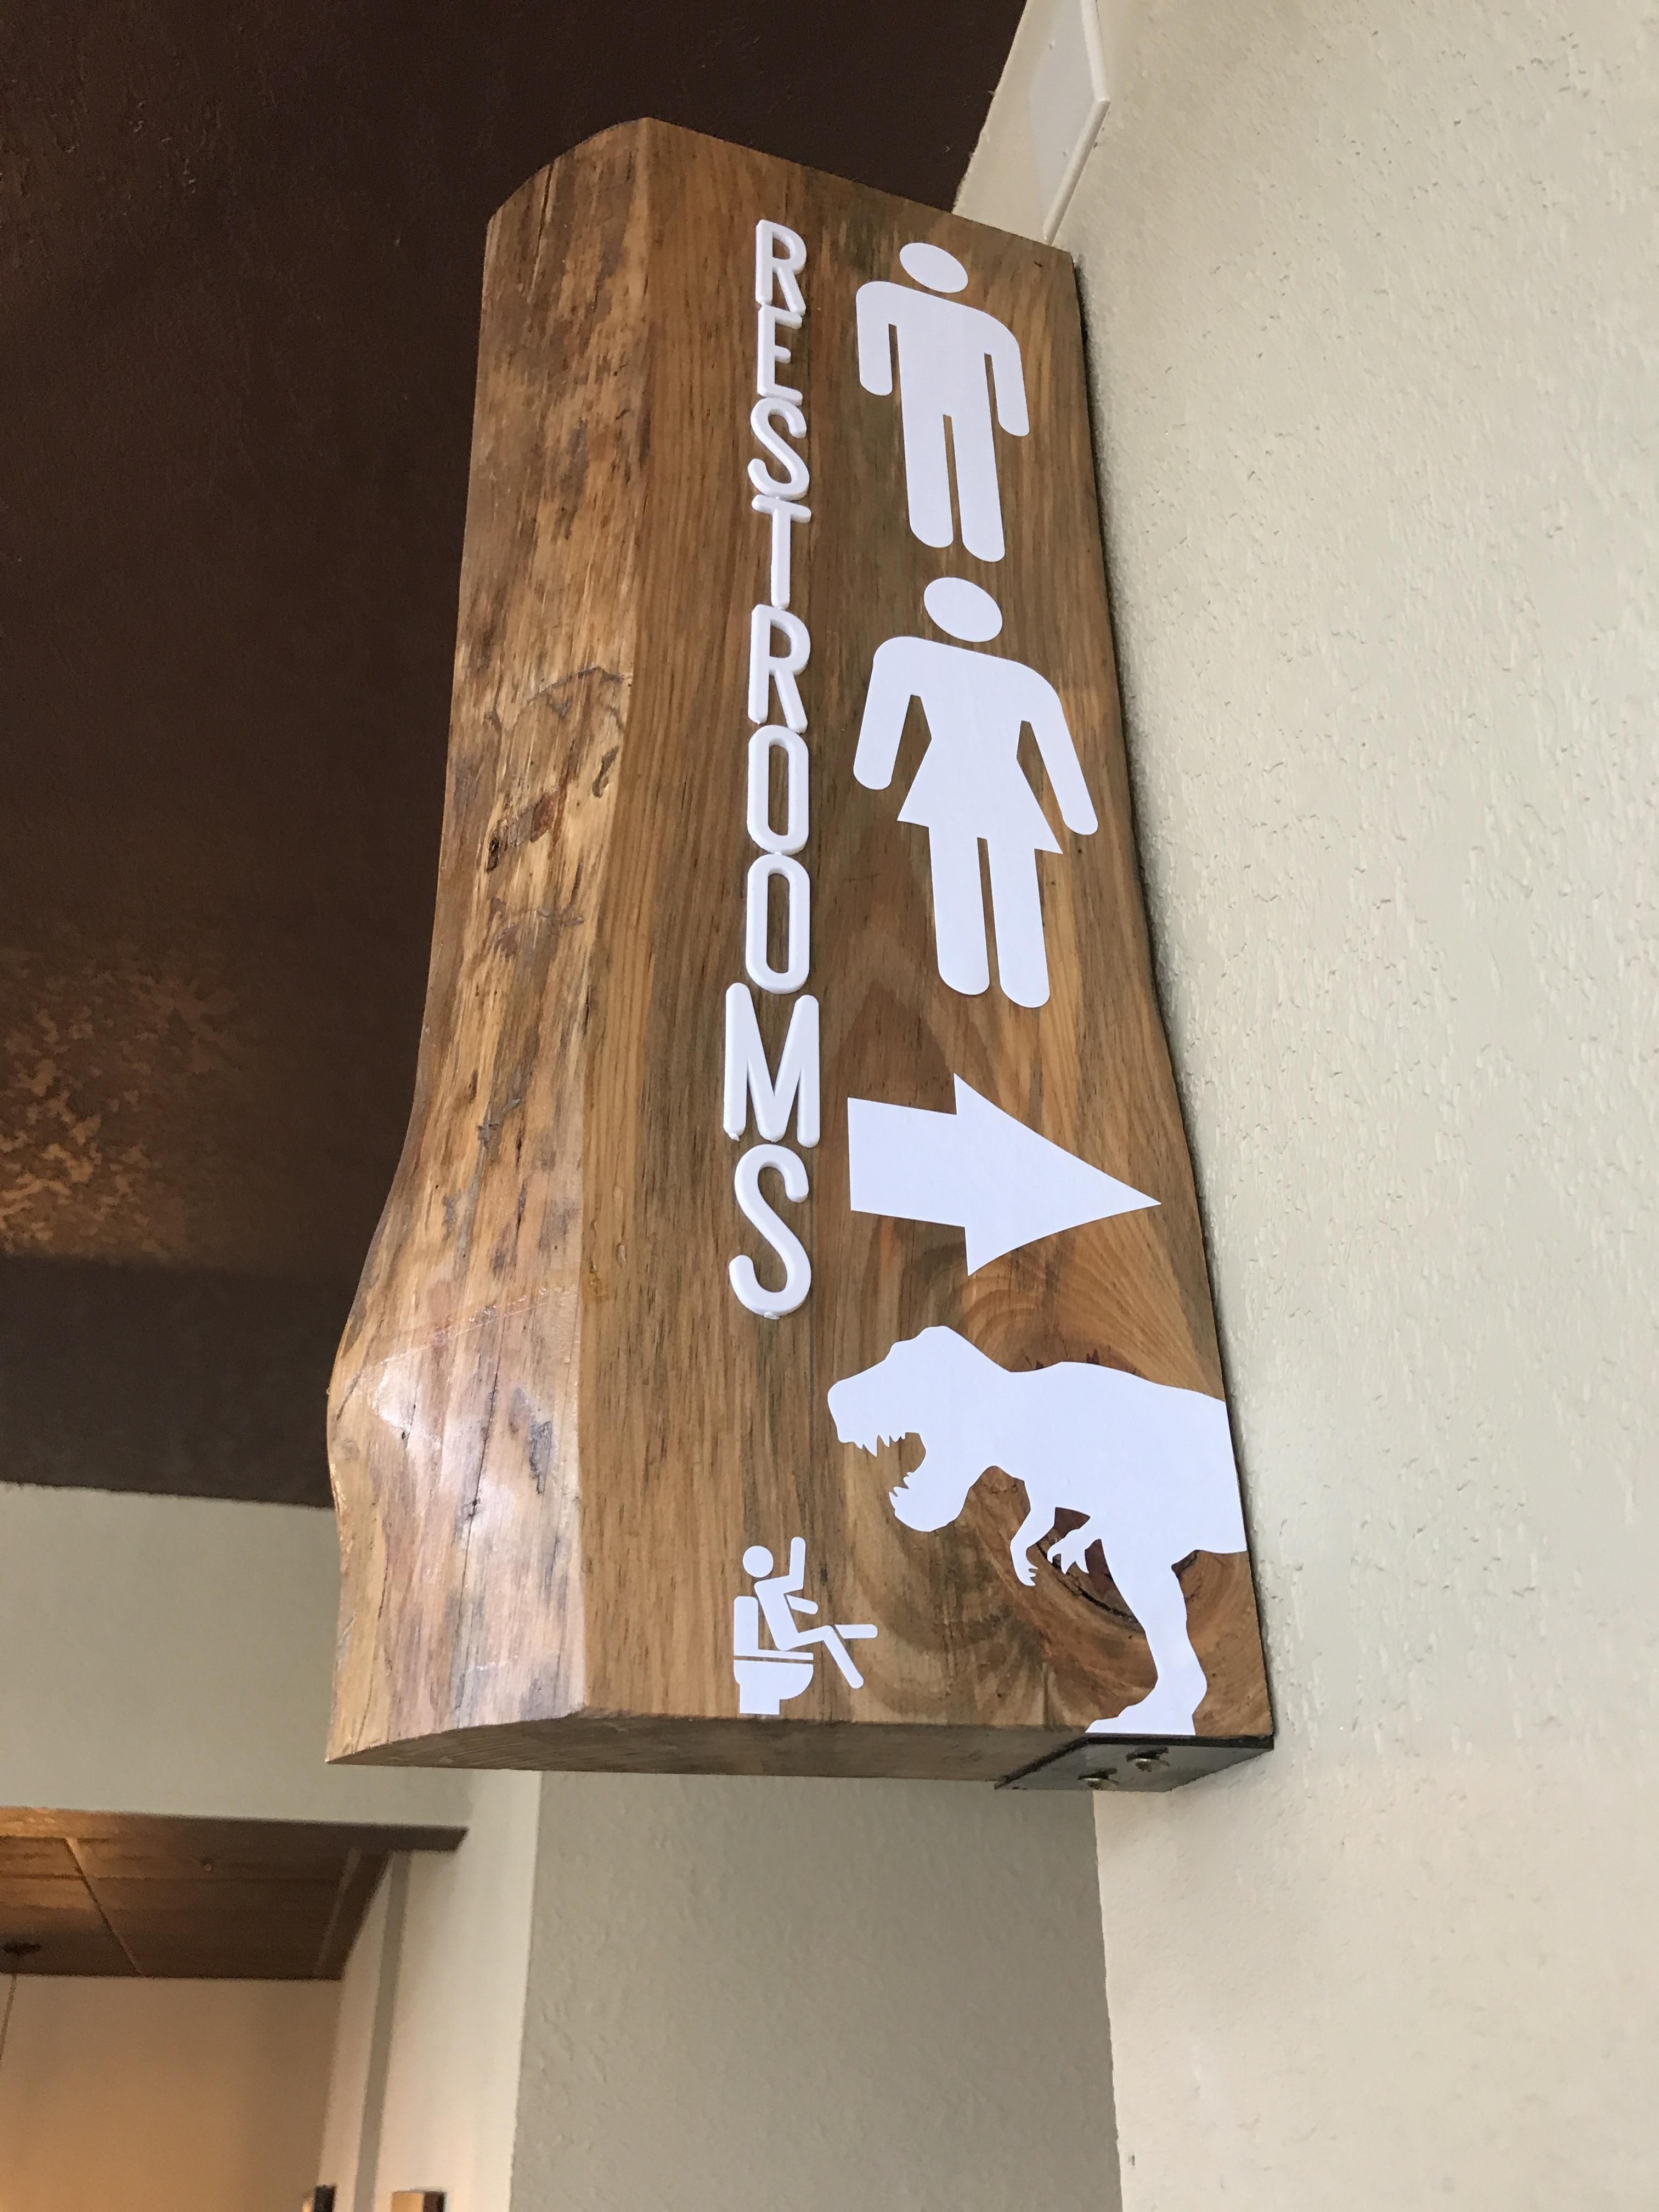 This restroom sign at a local brewery.